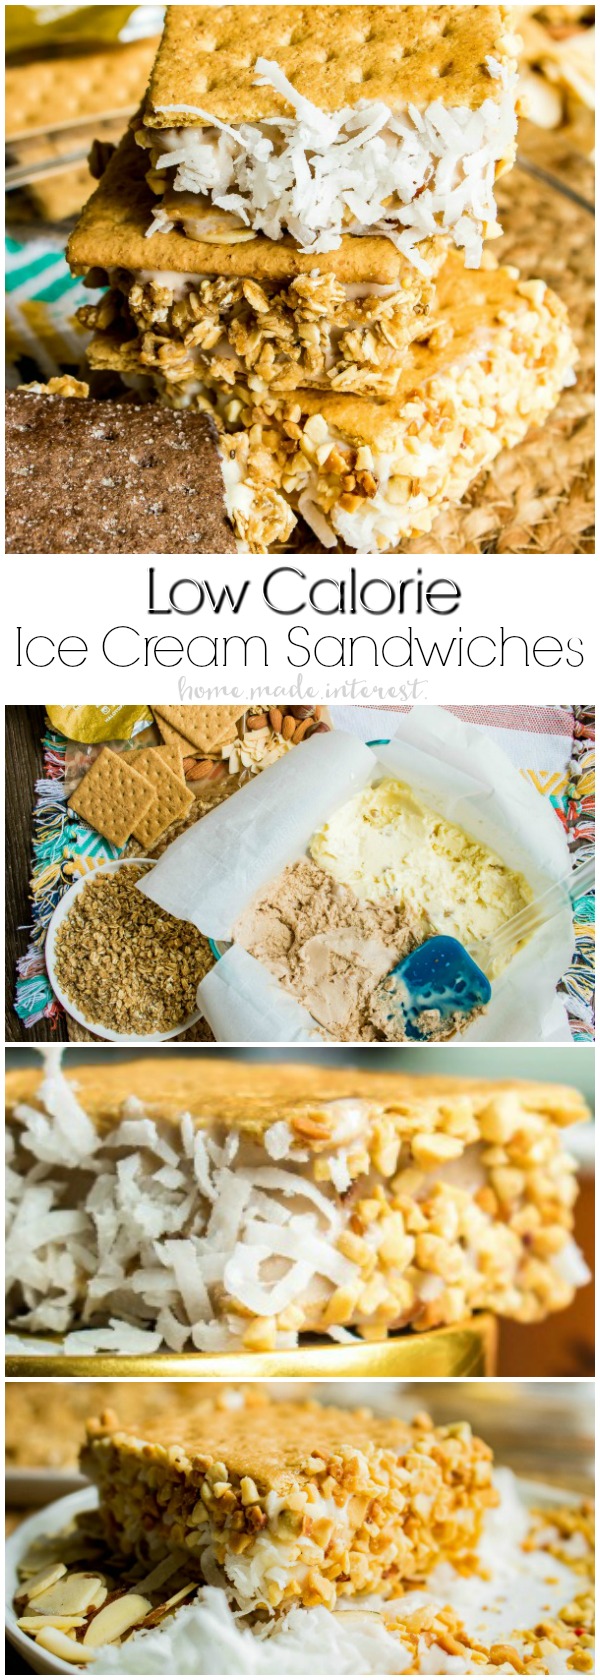 Low Calorie Ice Cream Sandwich | This low calorie ice cream sandwich recipe is a healthy dessert recipe that will be perfect on your diet! Low calorie ice cream sandwiched between two graham crackers and rolled in healthy toppings. 